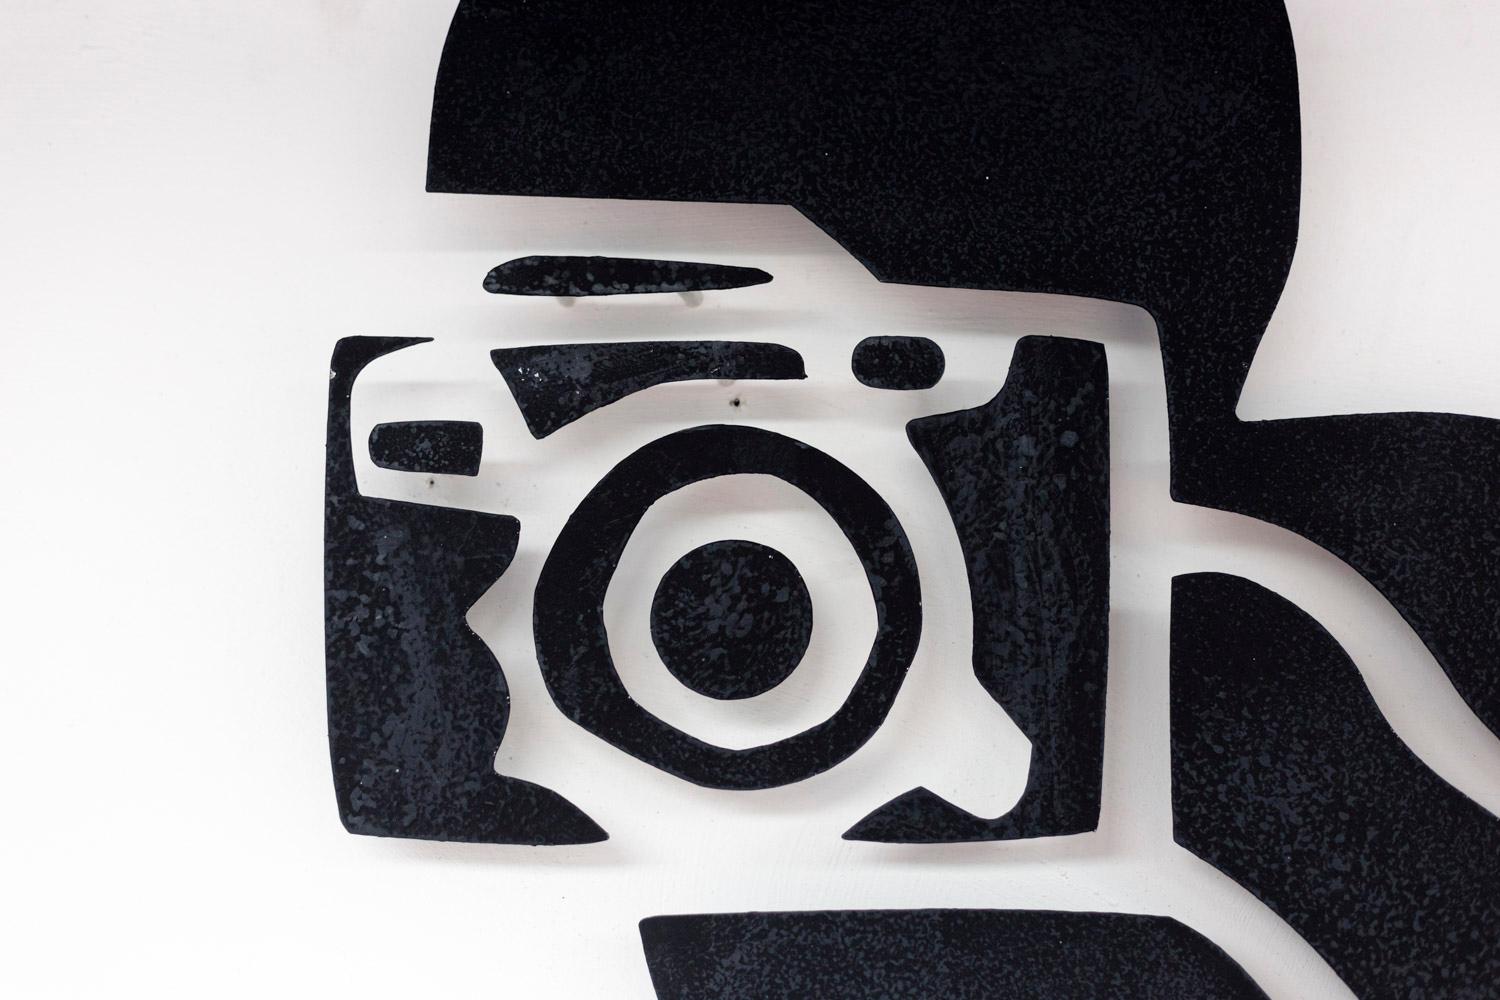 Antonine de Saint-Pierre, signed.
Bas-relief named “Paparazzi” in black lacquered metal on white background figuring 5 characters taking pictures with their cameras in a Pop Art style.

French contemporary work.

Signed, named and numbered E.A.